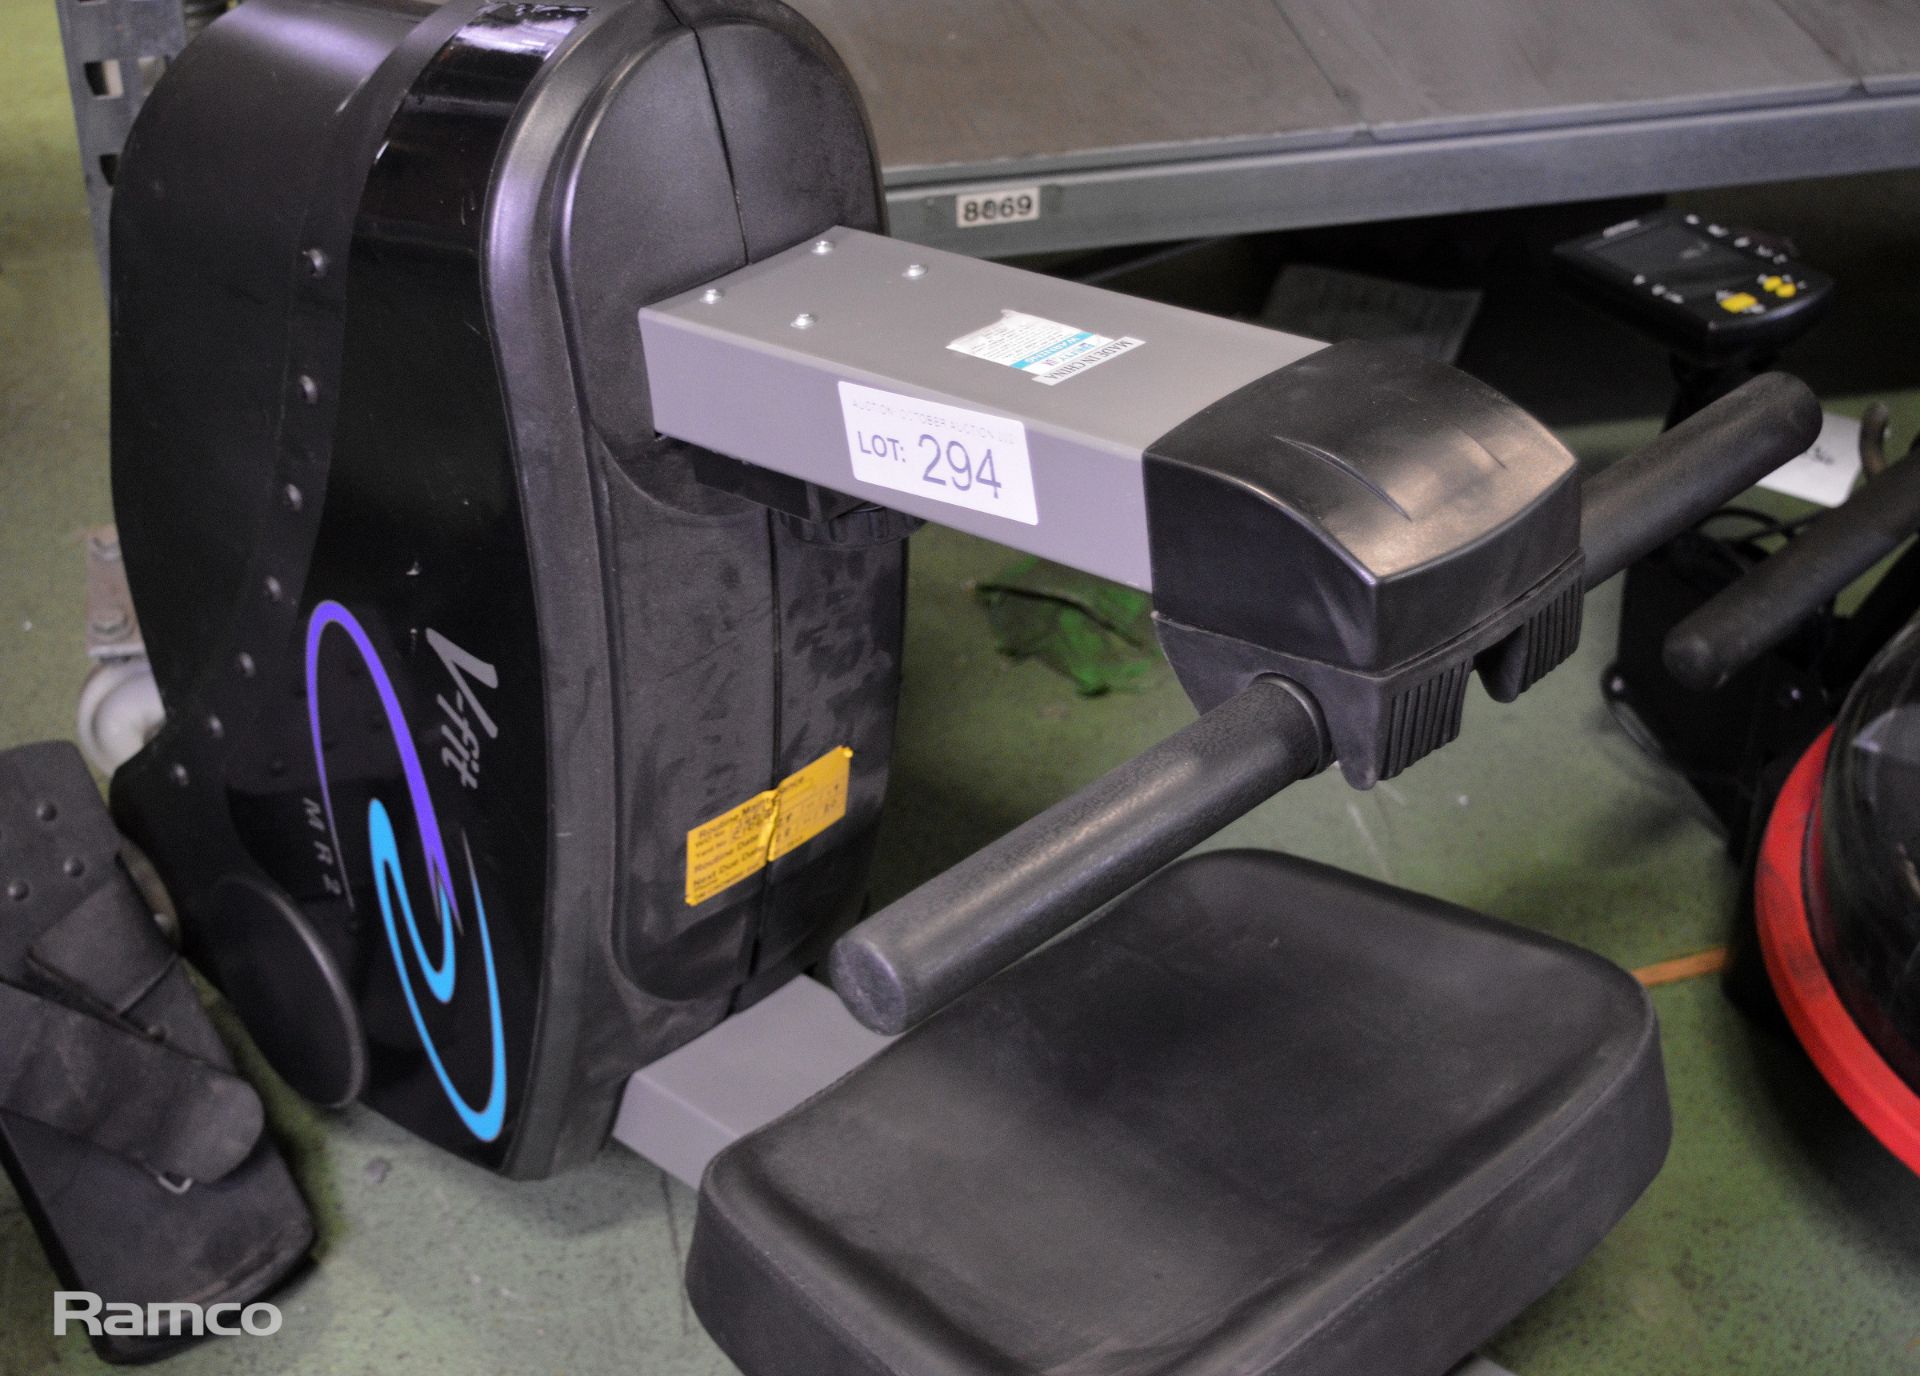 V-Fit Mercury MR2 Magnetic Rowing Machine - Image 2 of 5